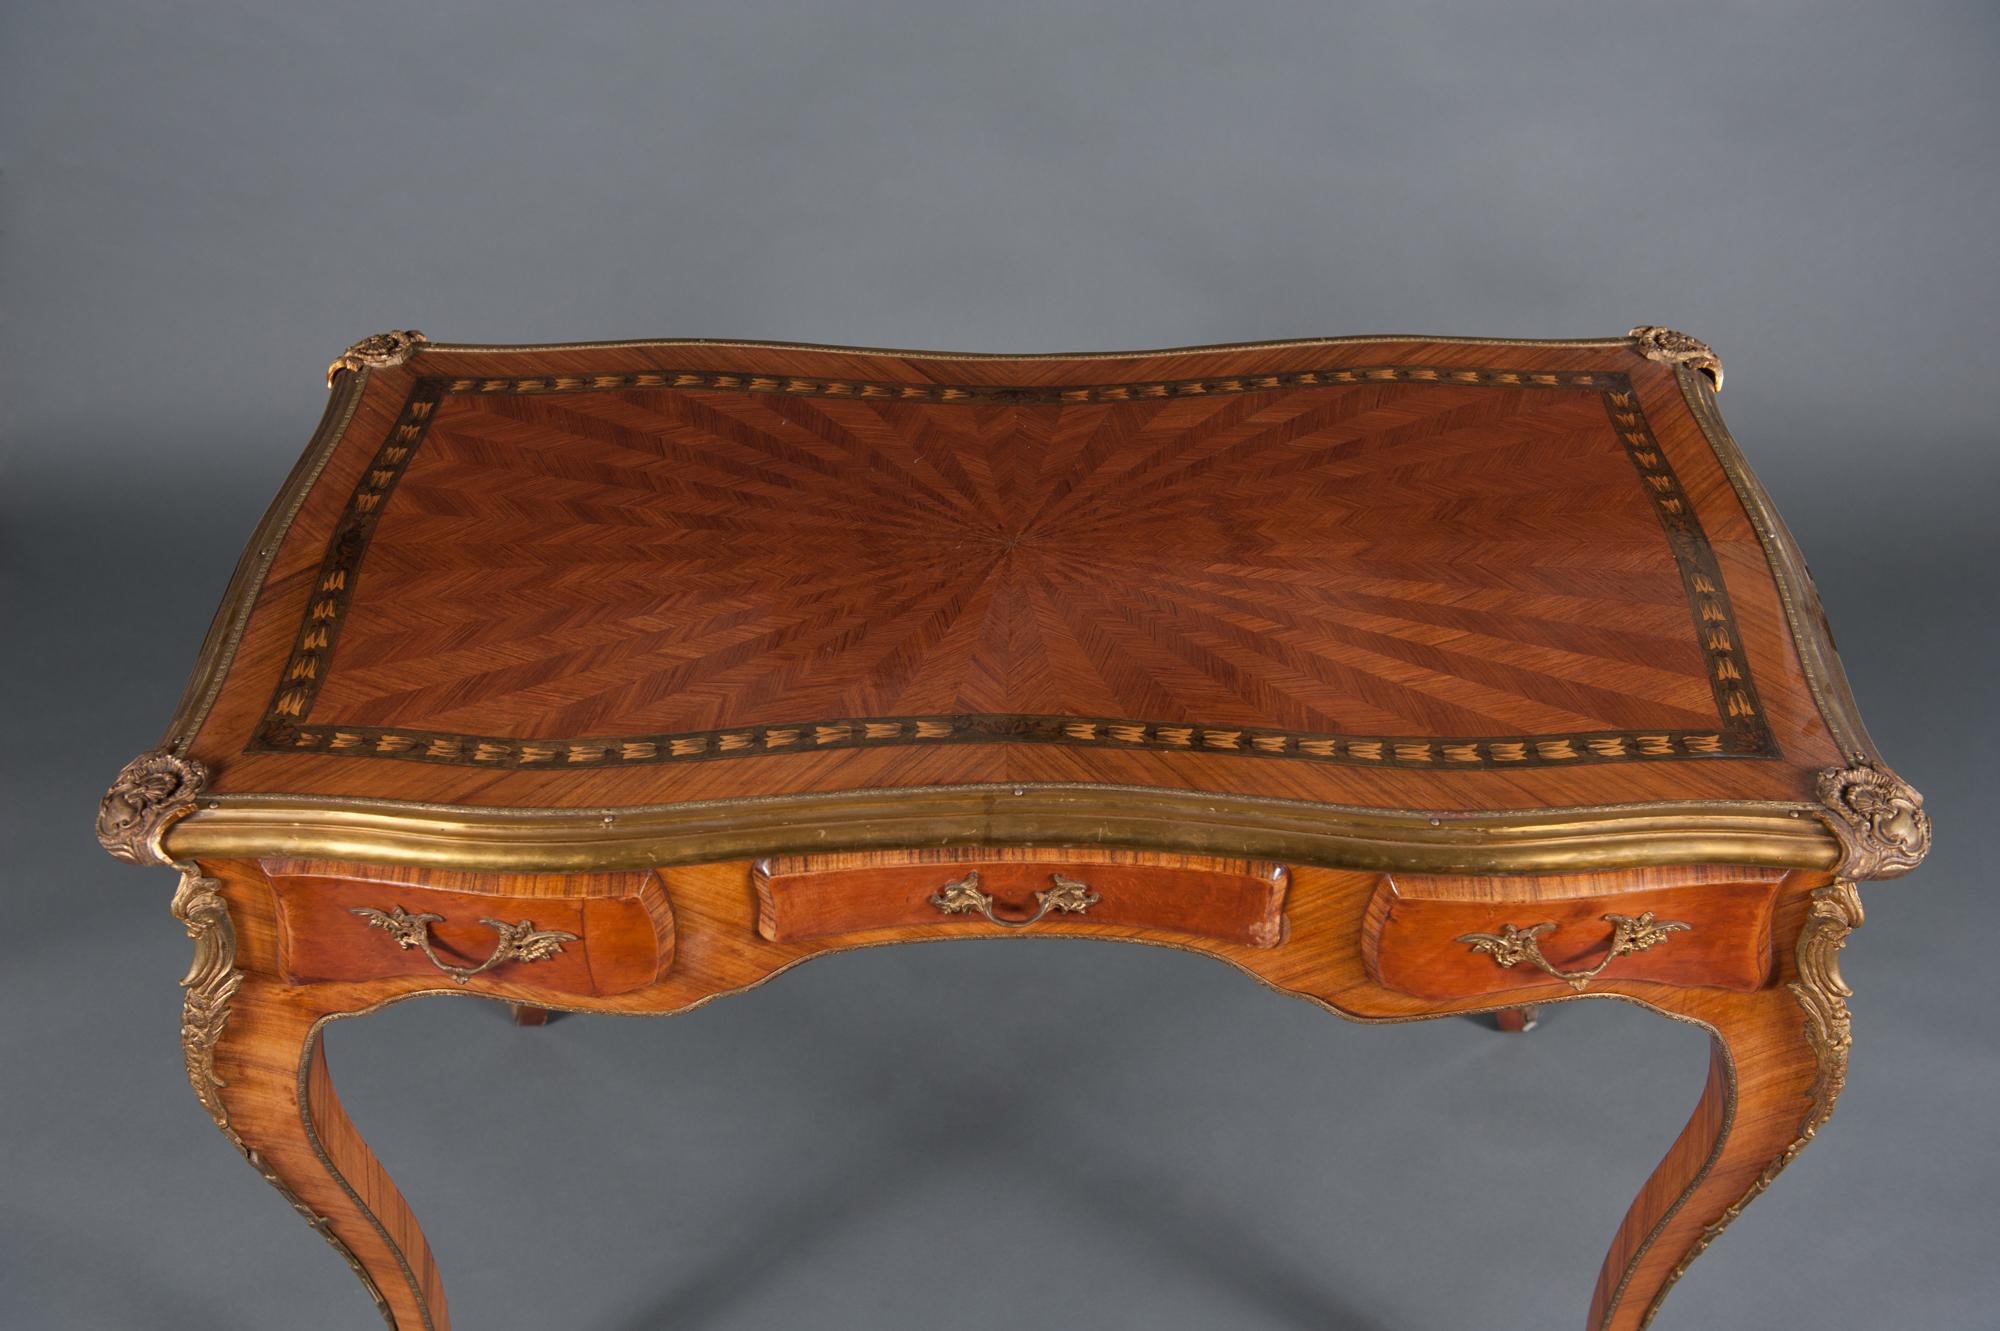 A very fine and well-proportioned 19th century French lady's desk, the case veneered with marquetry decoration and embellished with finely cast and finished gilt bronze mounts. The desk is fitted with three drawers to the frieze and three ‘faux’